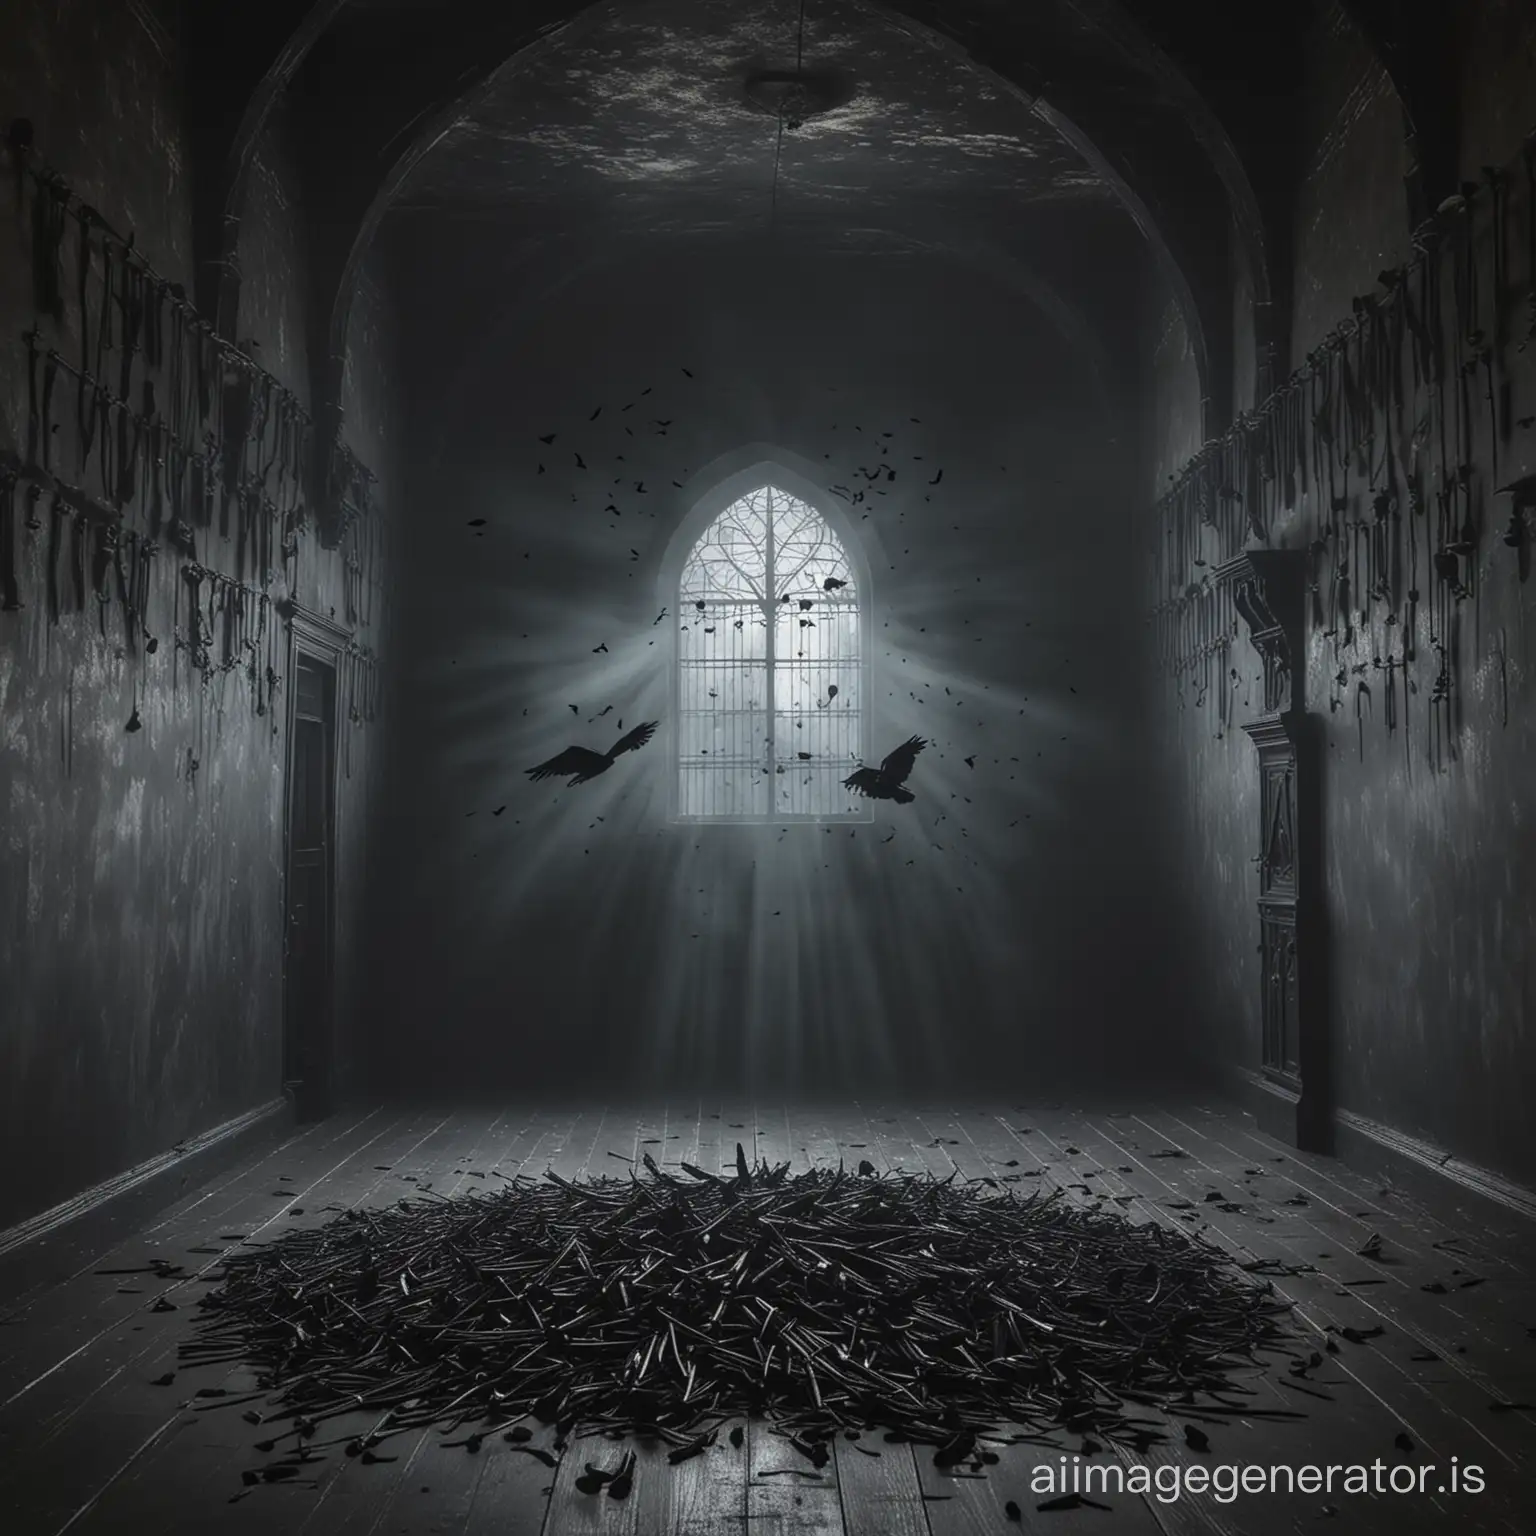 Enchanting-Dark-Castle-Room-with-Mystical-Light-and-Crow-Quills